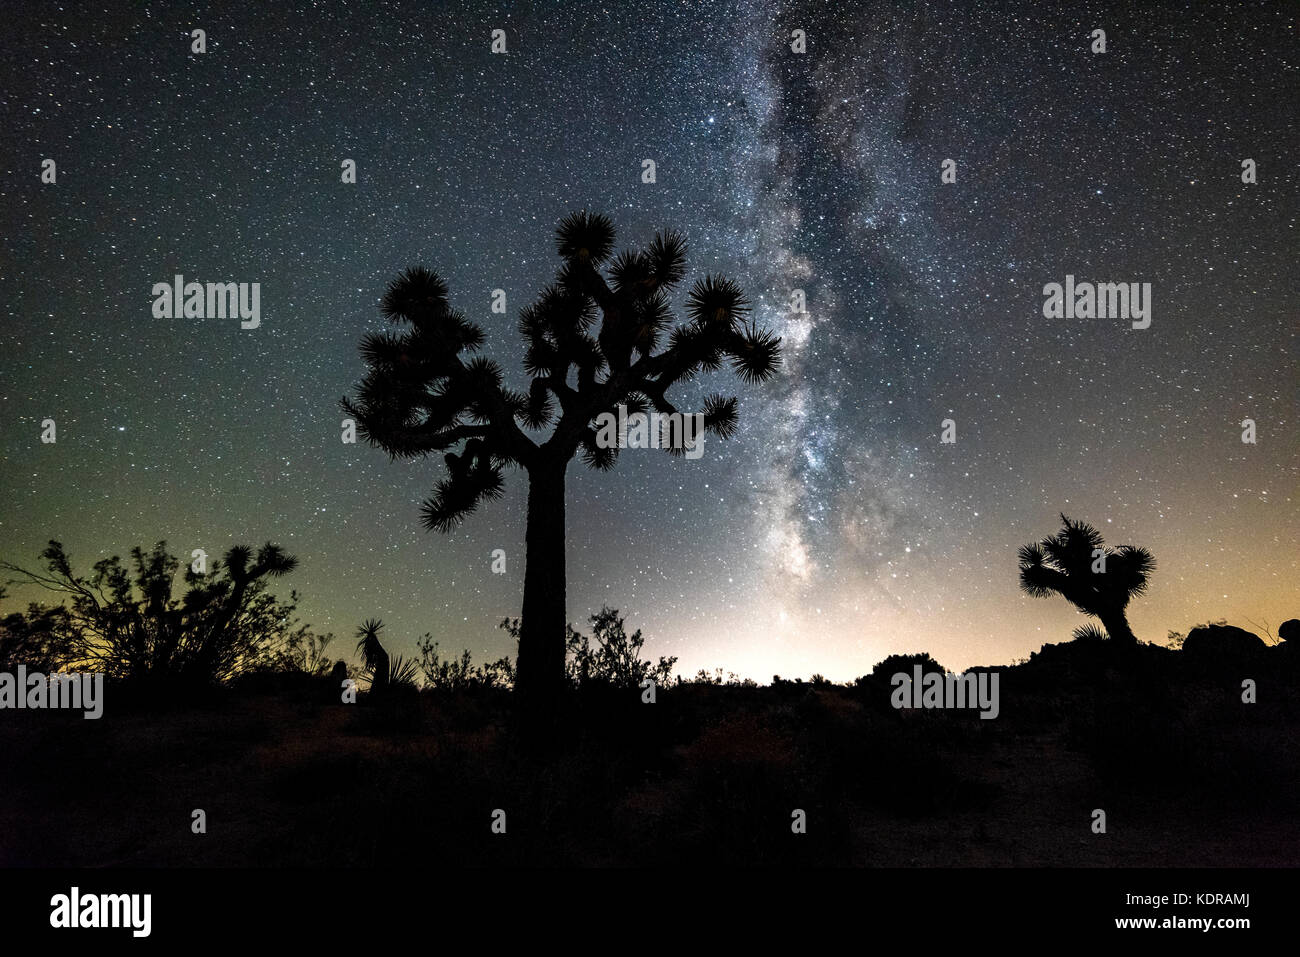 The night sky peppered with thousands of stars and the beautiful Milky Way, which hangs vertically over a Joshua Tree in in the Mojave desert. Stock Photo